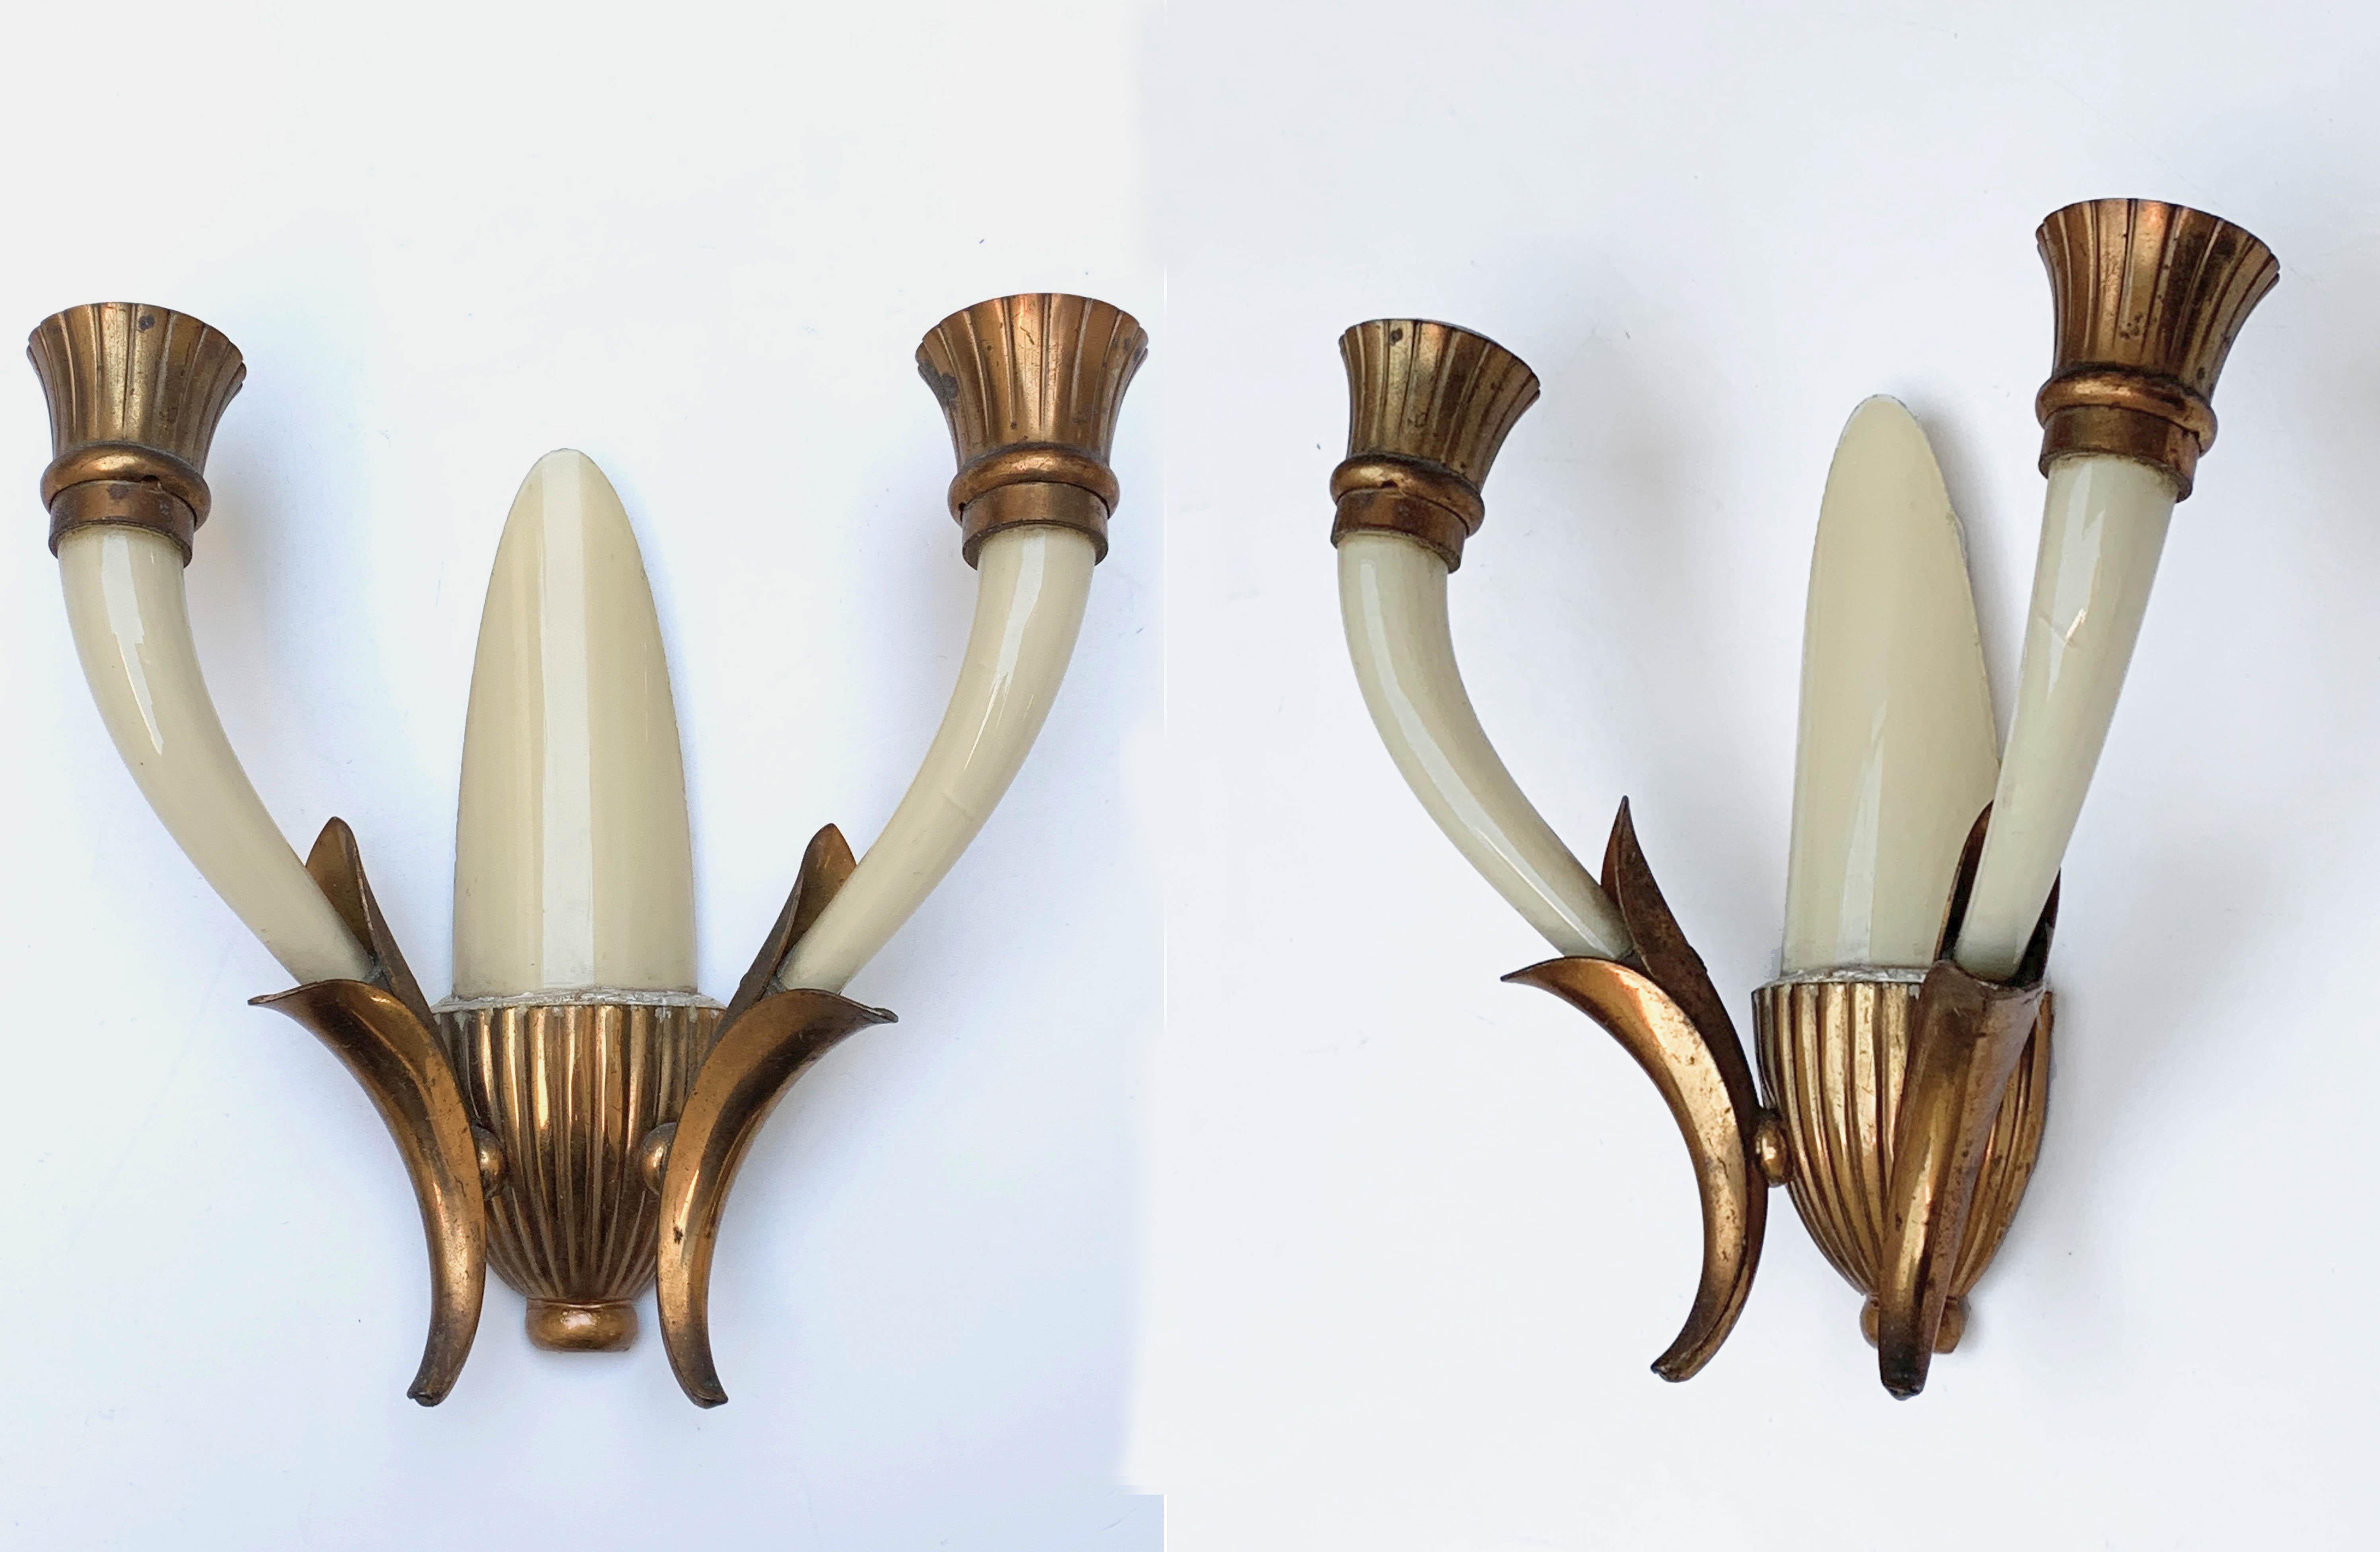 Elegant pair of wall lamps attributed to Gugliemo Ulrich. They were produced in Venice, Italy in the 1940s.

This pair of sconces is a unique masterpiece, as the sconces are entirely handmade from blown Murano glass, produced exclusively on the